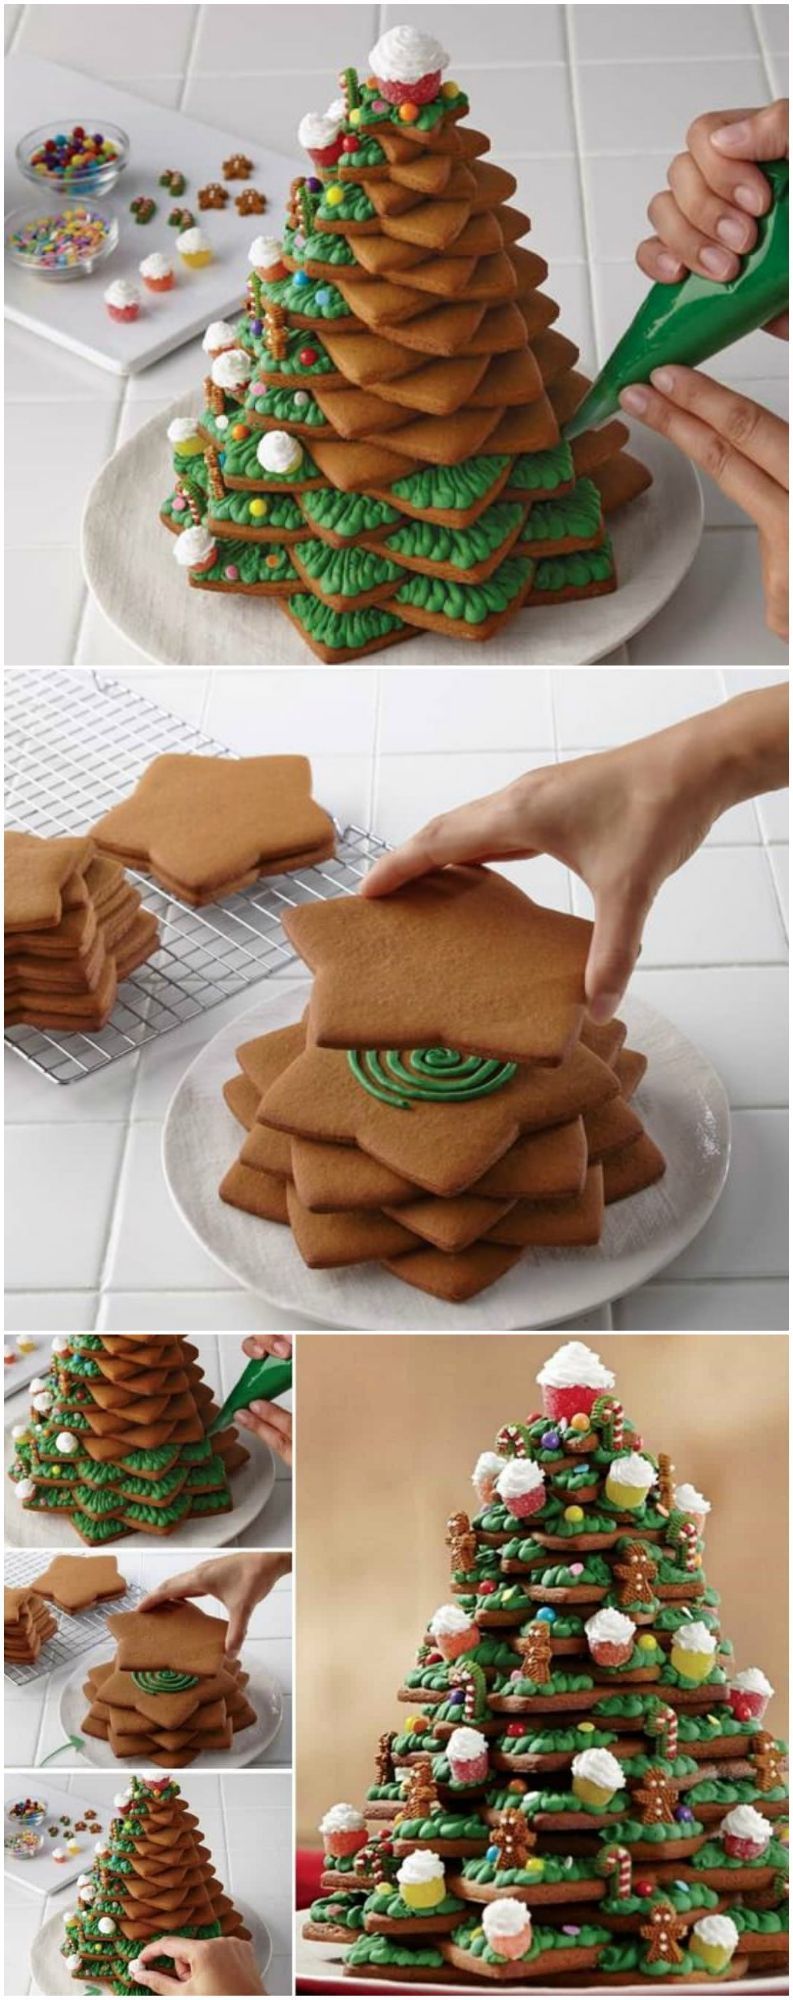 3D Cookie Christmas Tree Recipe With Video Tutorial -   16 desserts Creative parties ideas